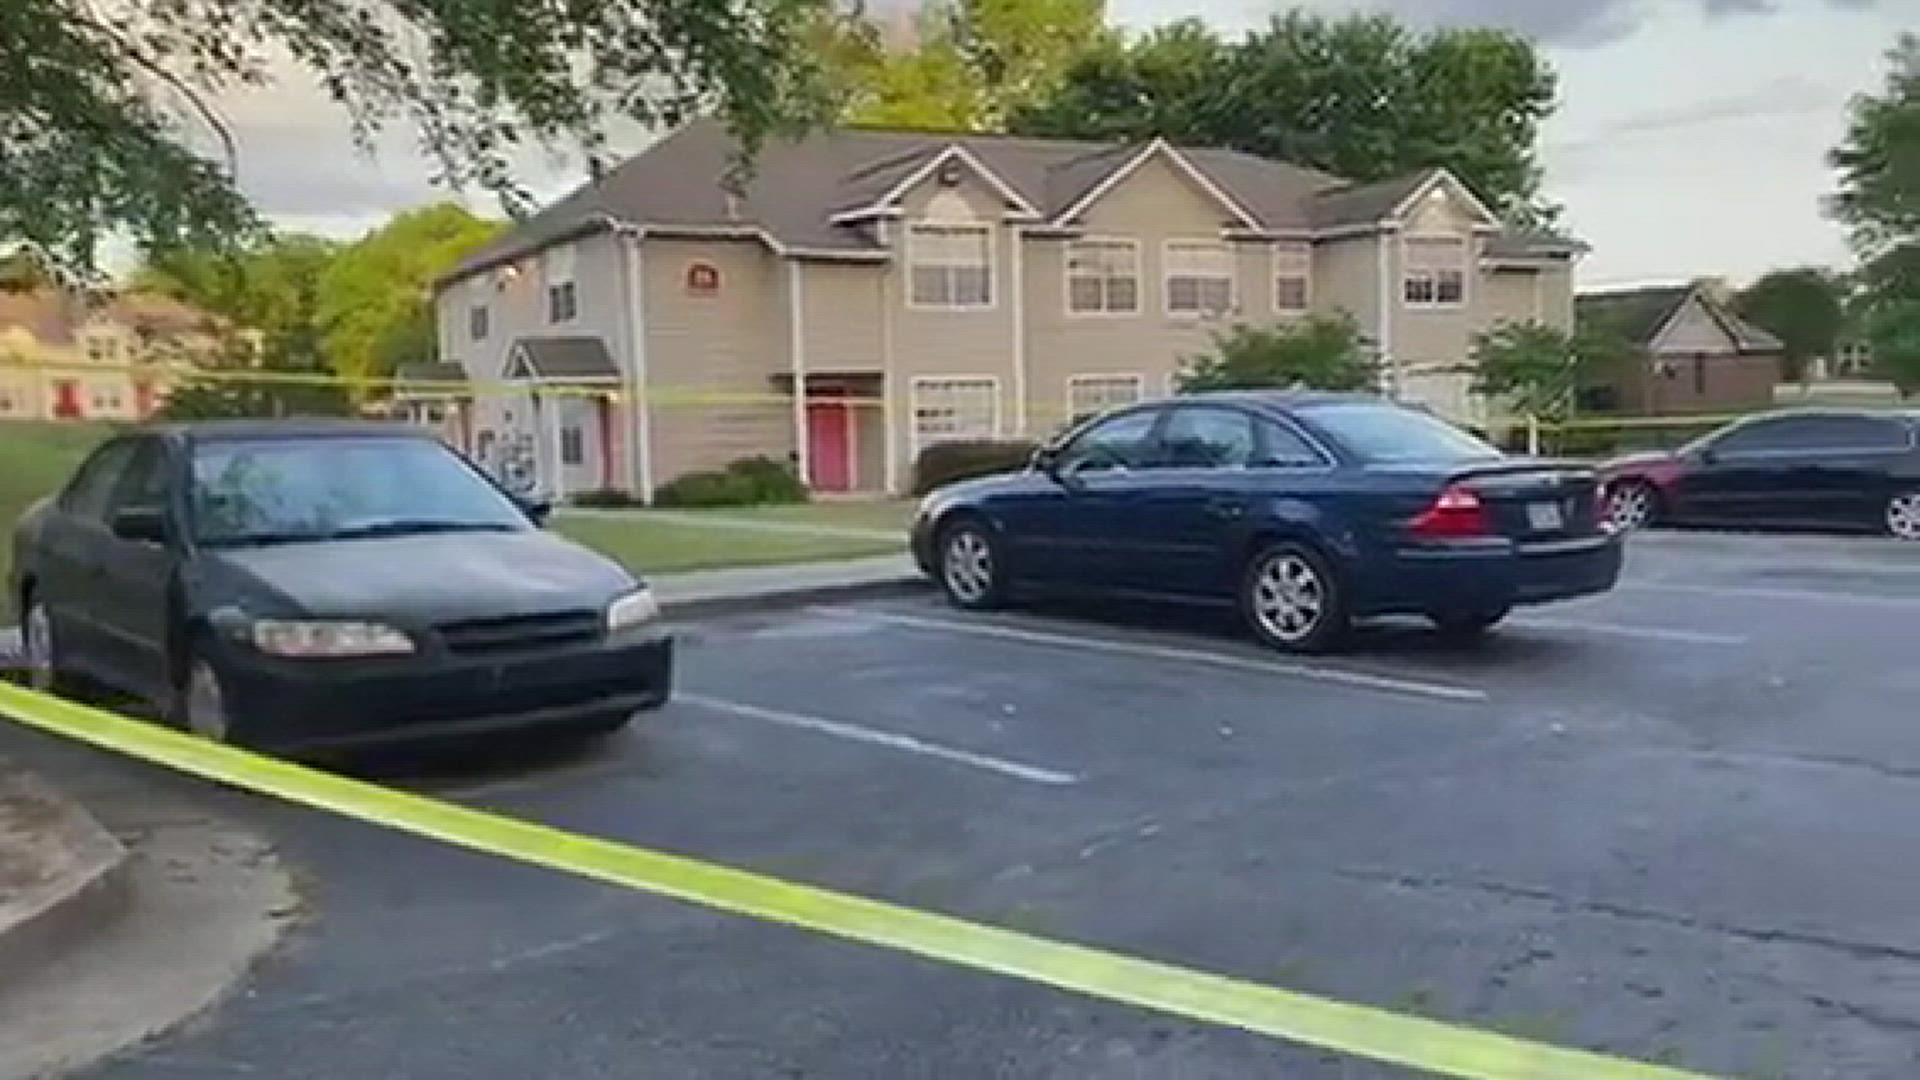 25-year-old woman dies after shooting at West Club Apartments in Macon
Credit: Raime